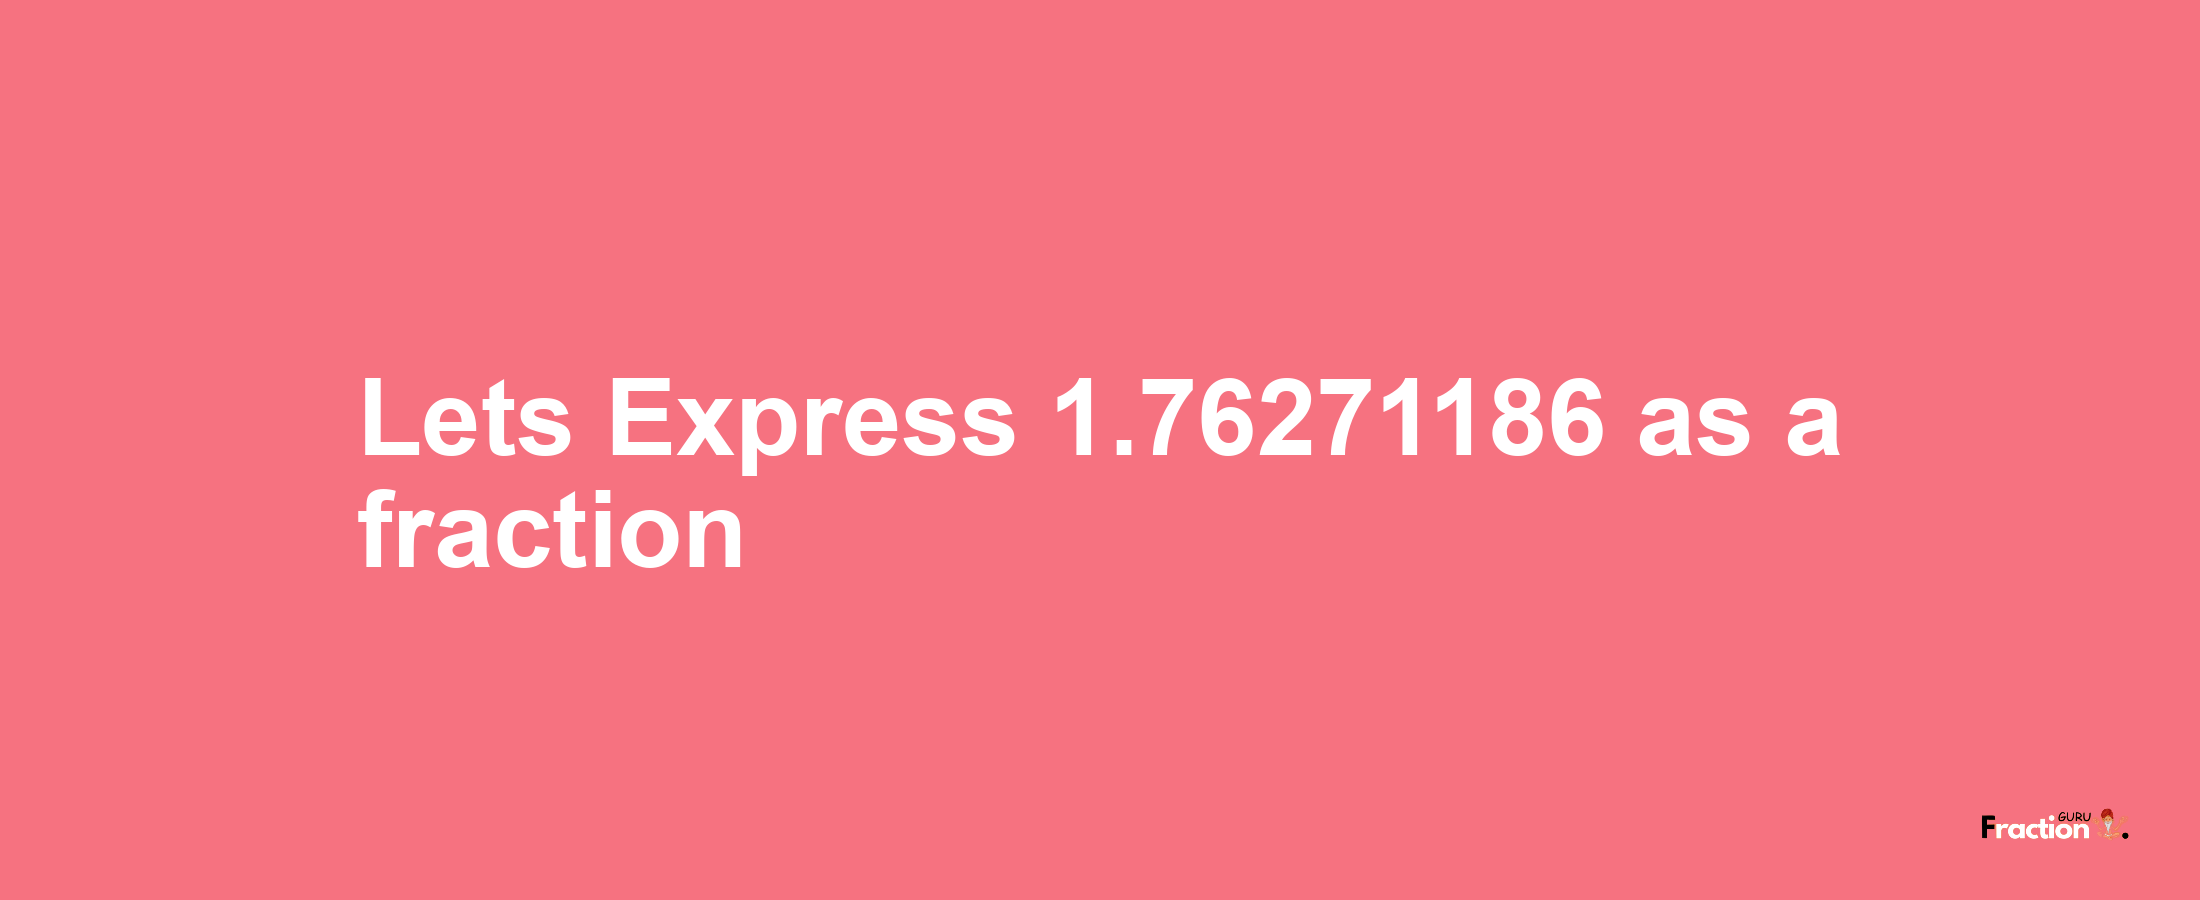 Lets Express 1.76271186 as afraction